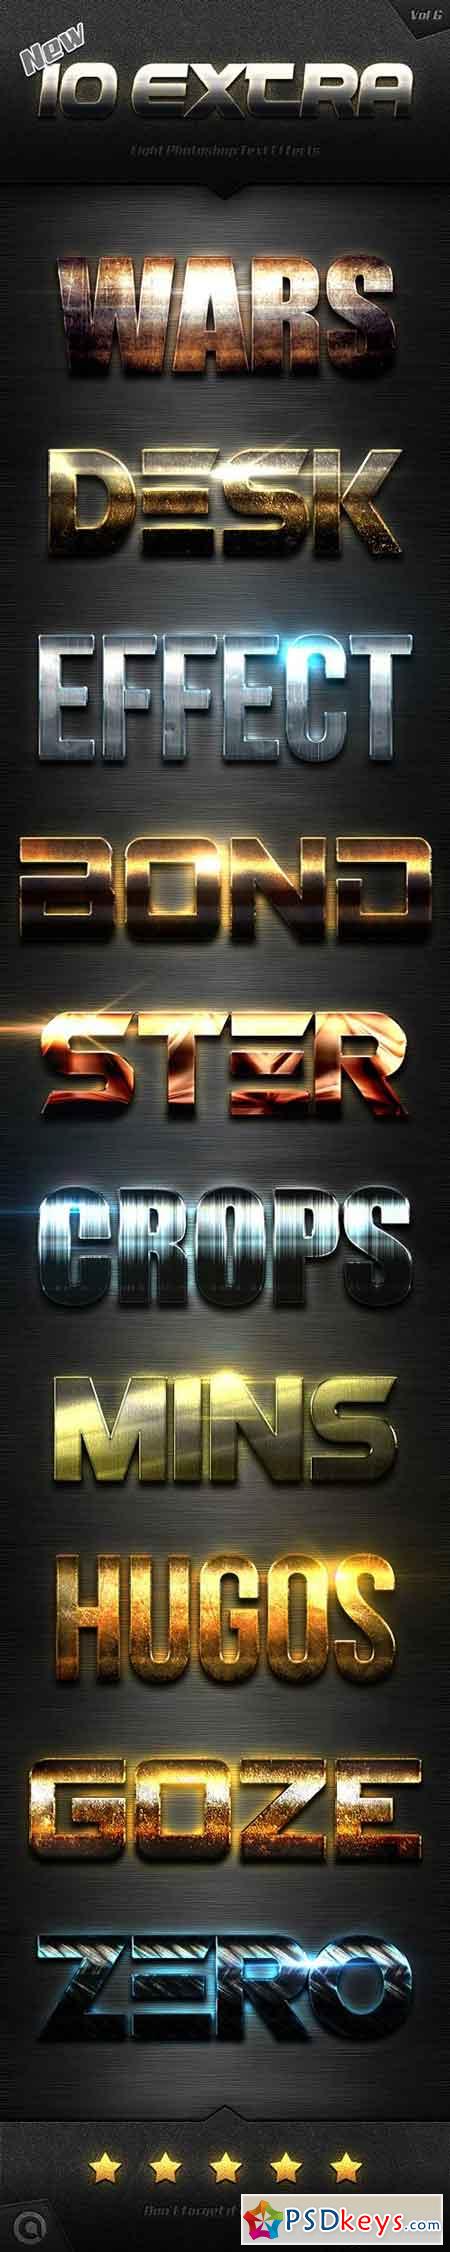 New 10 Extra Light Text Effects Vol.6 19453640